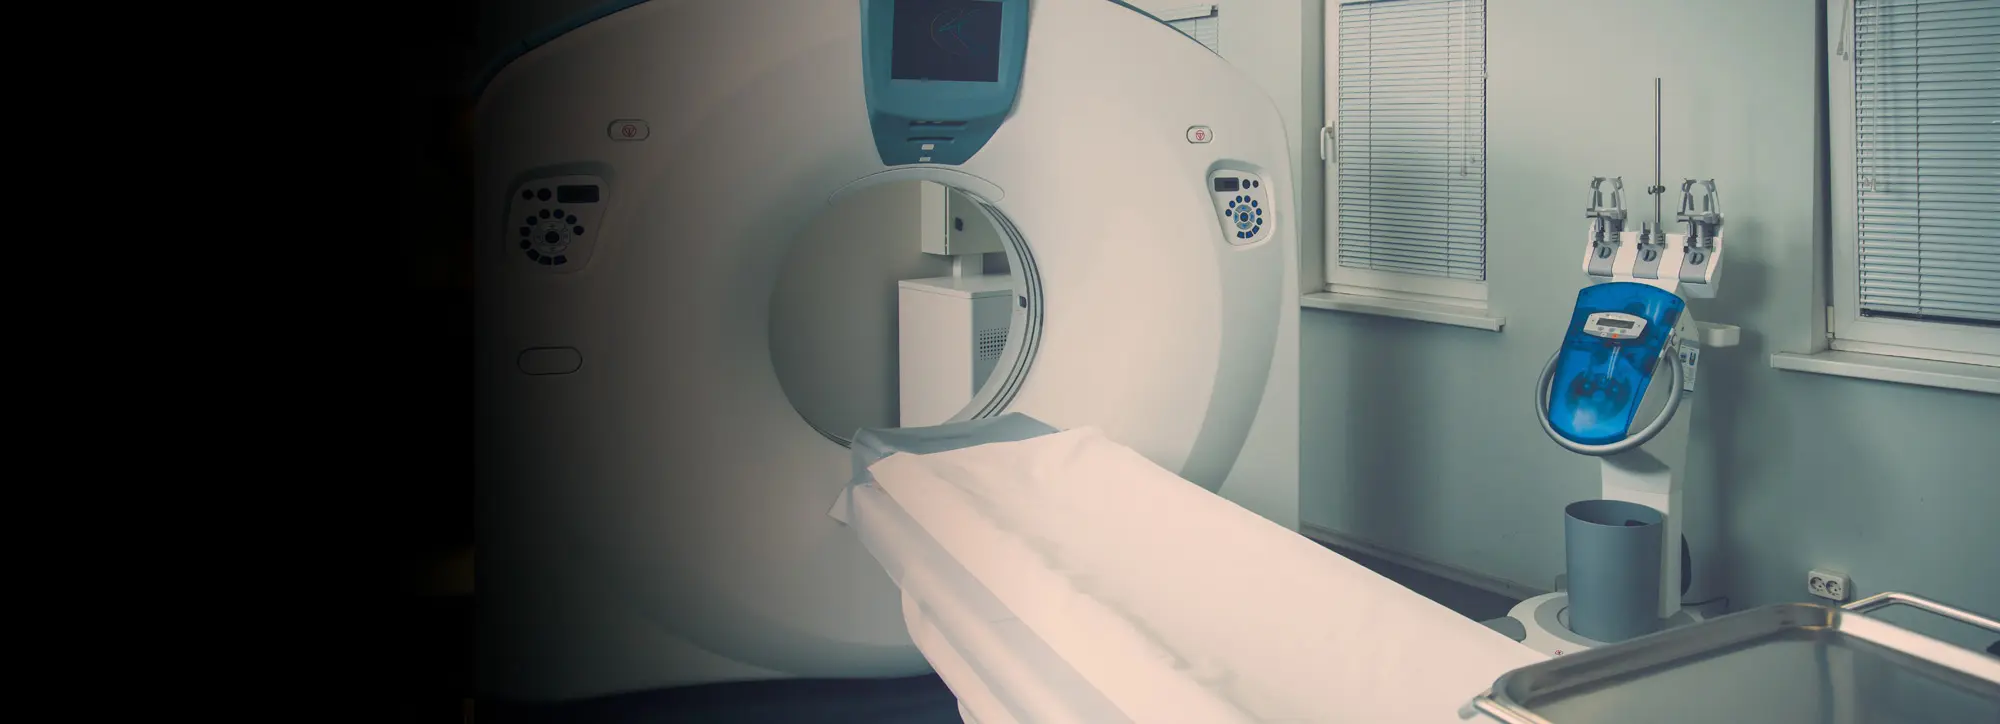 Powerful scans with world-class clinical measurements to enhance